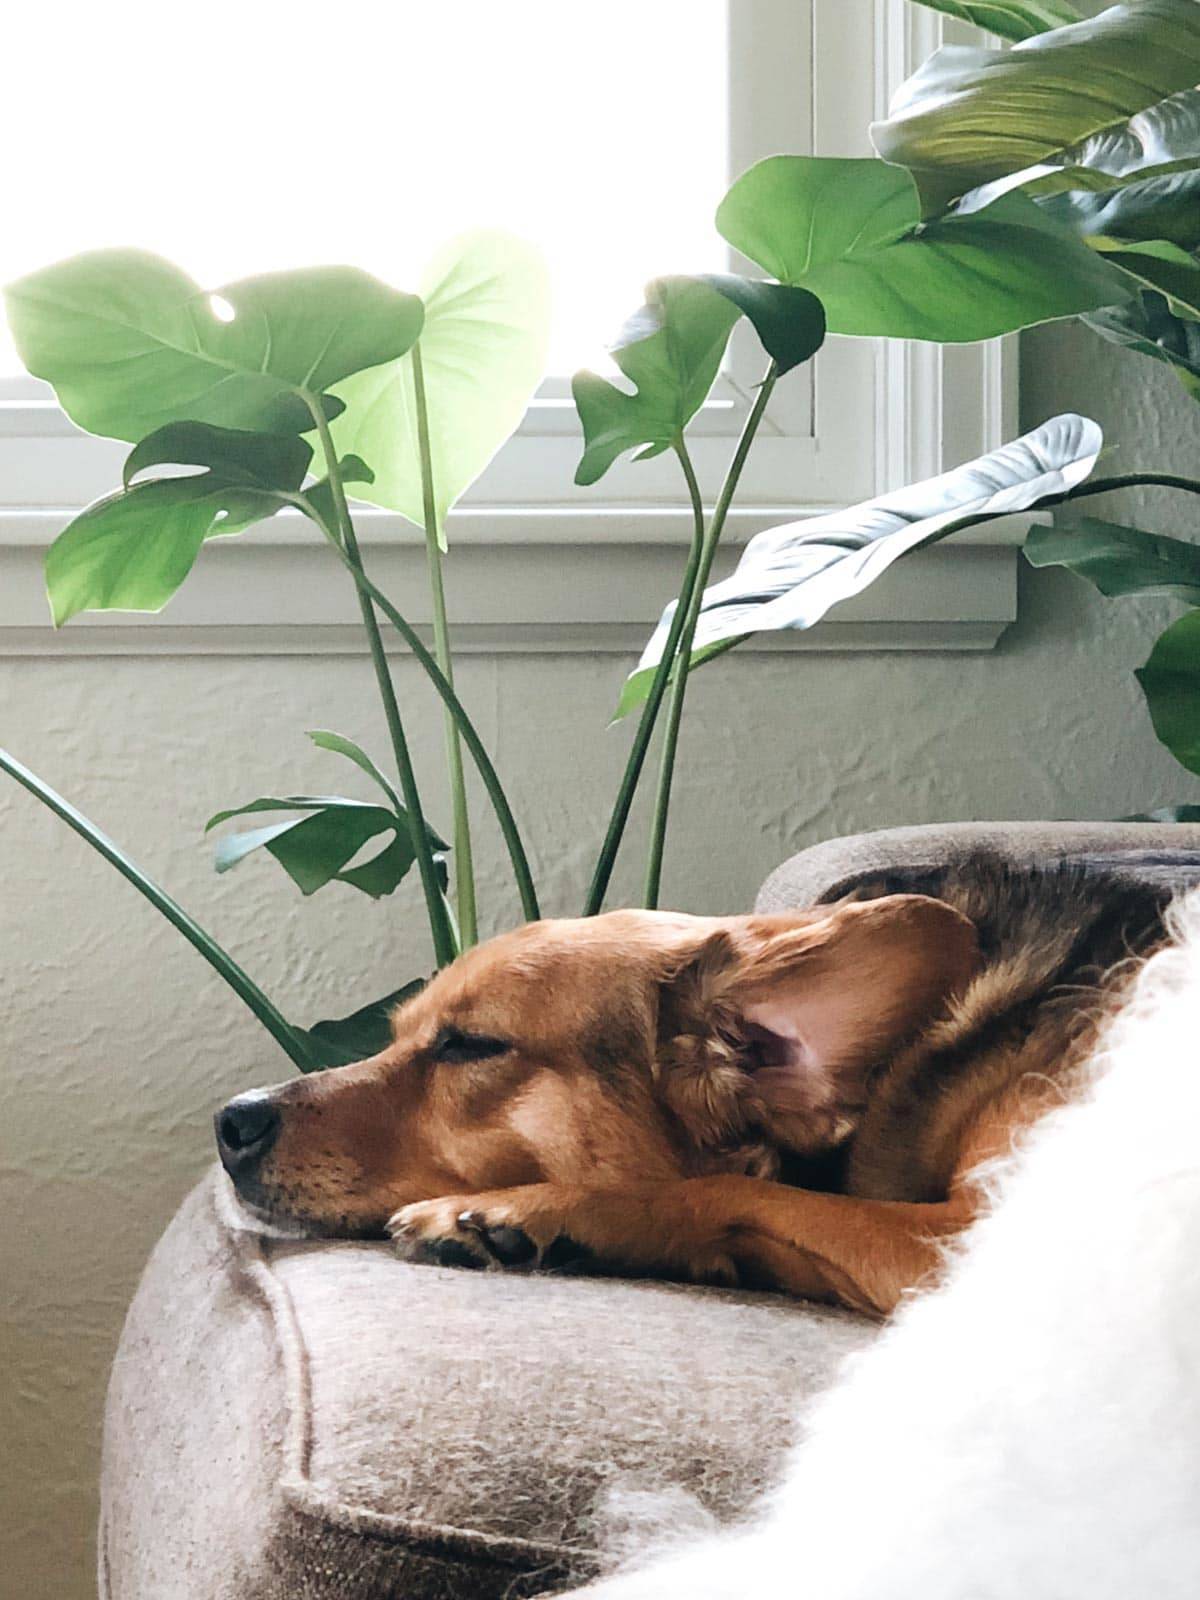 A brown dog lying on a soft chair with green plants nearby.